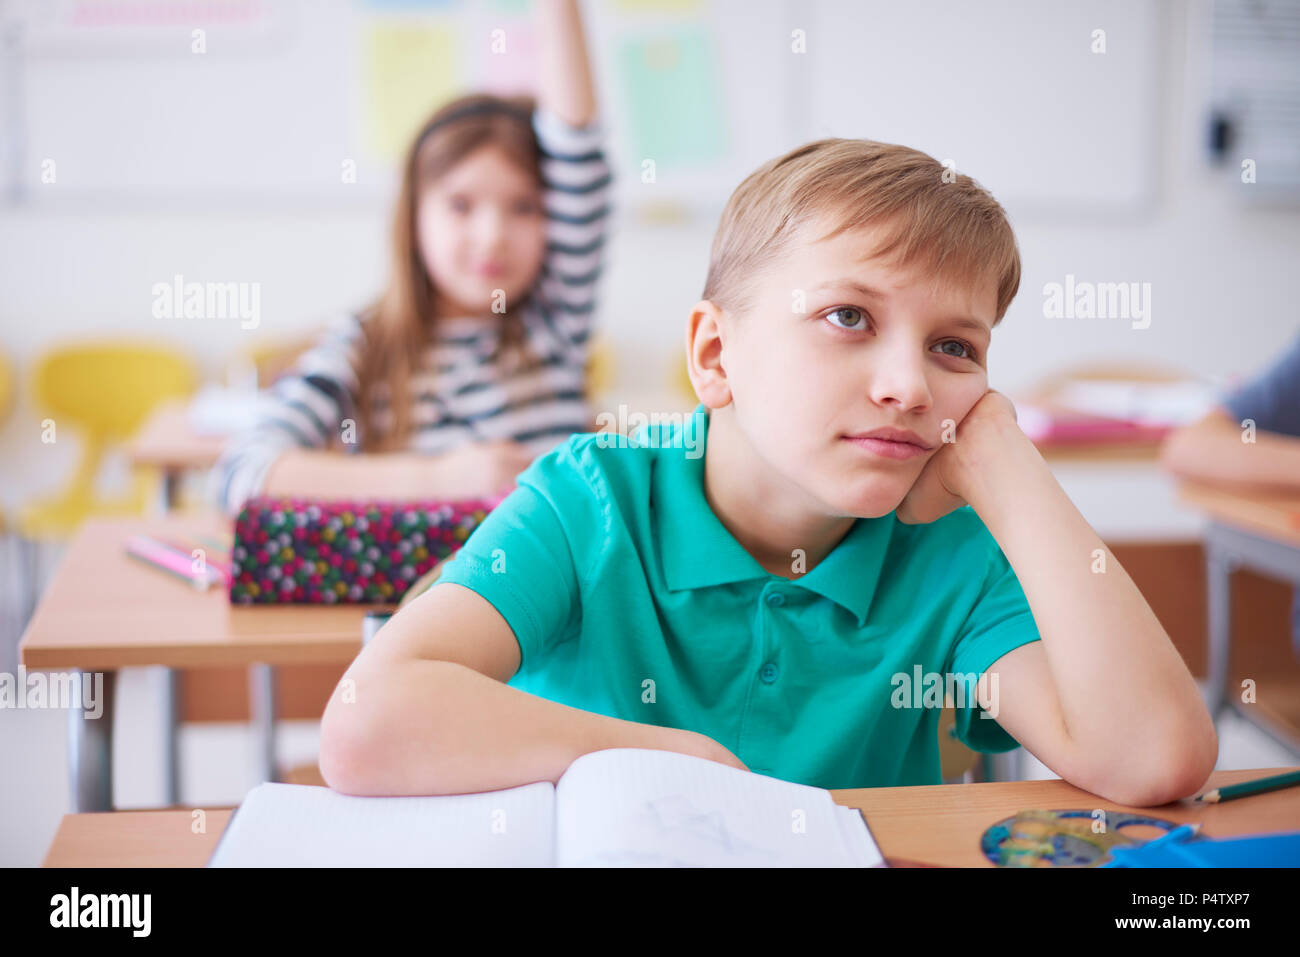 Bored schoolboy in class with girl raising her hand in background Stock Photo